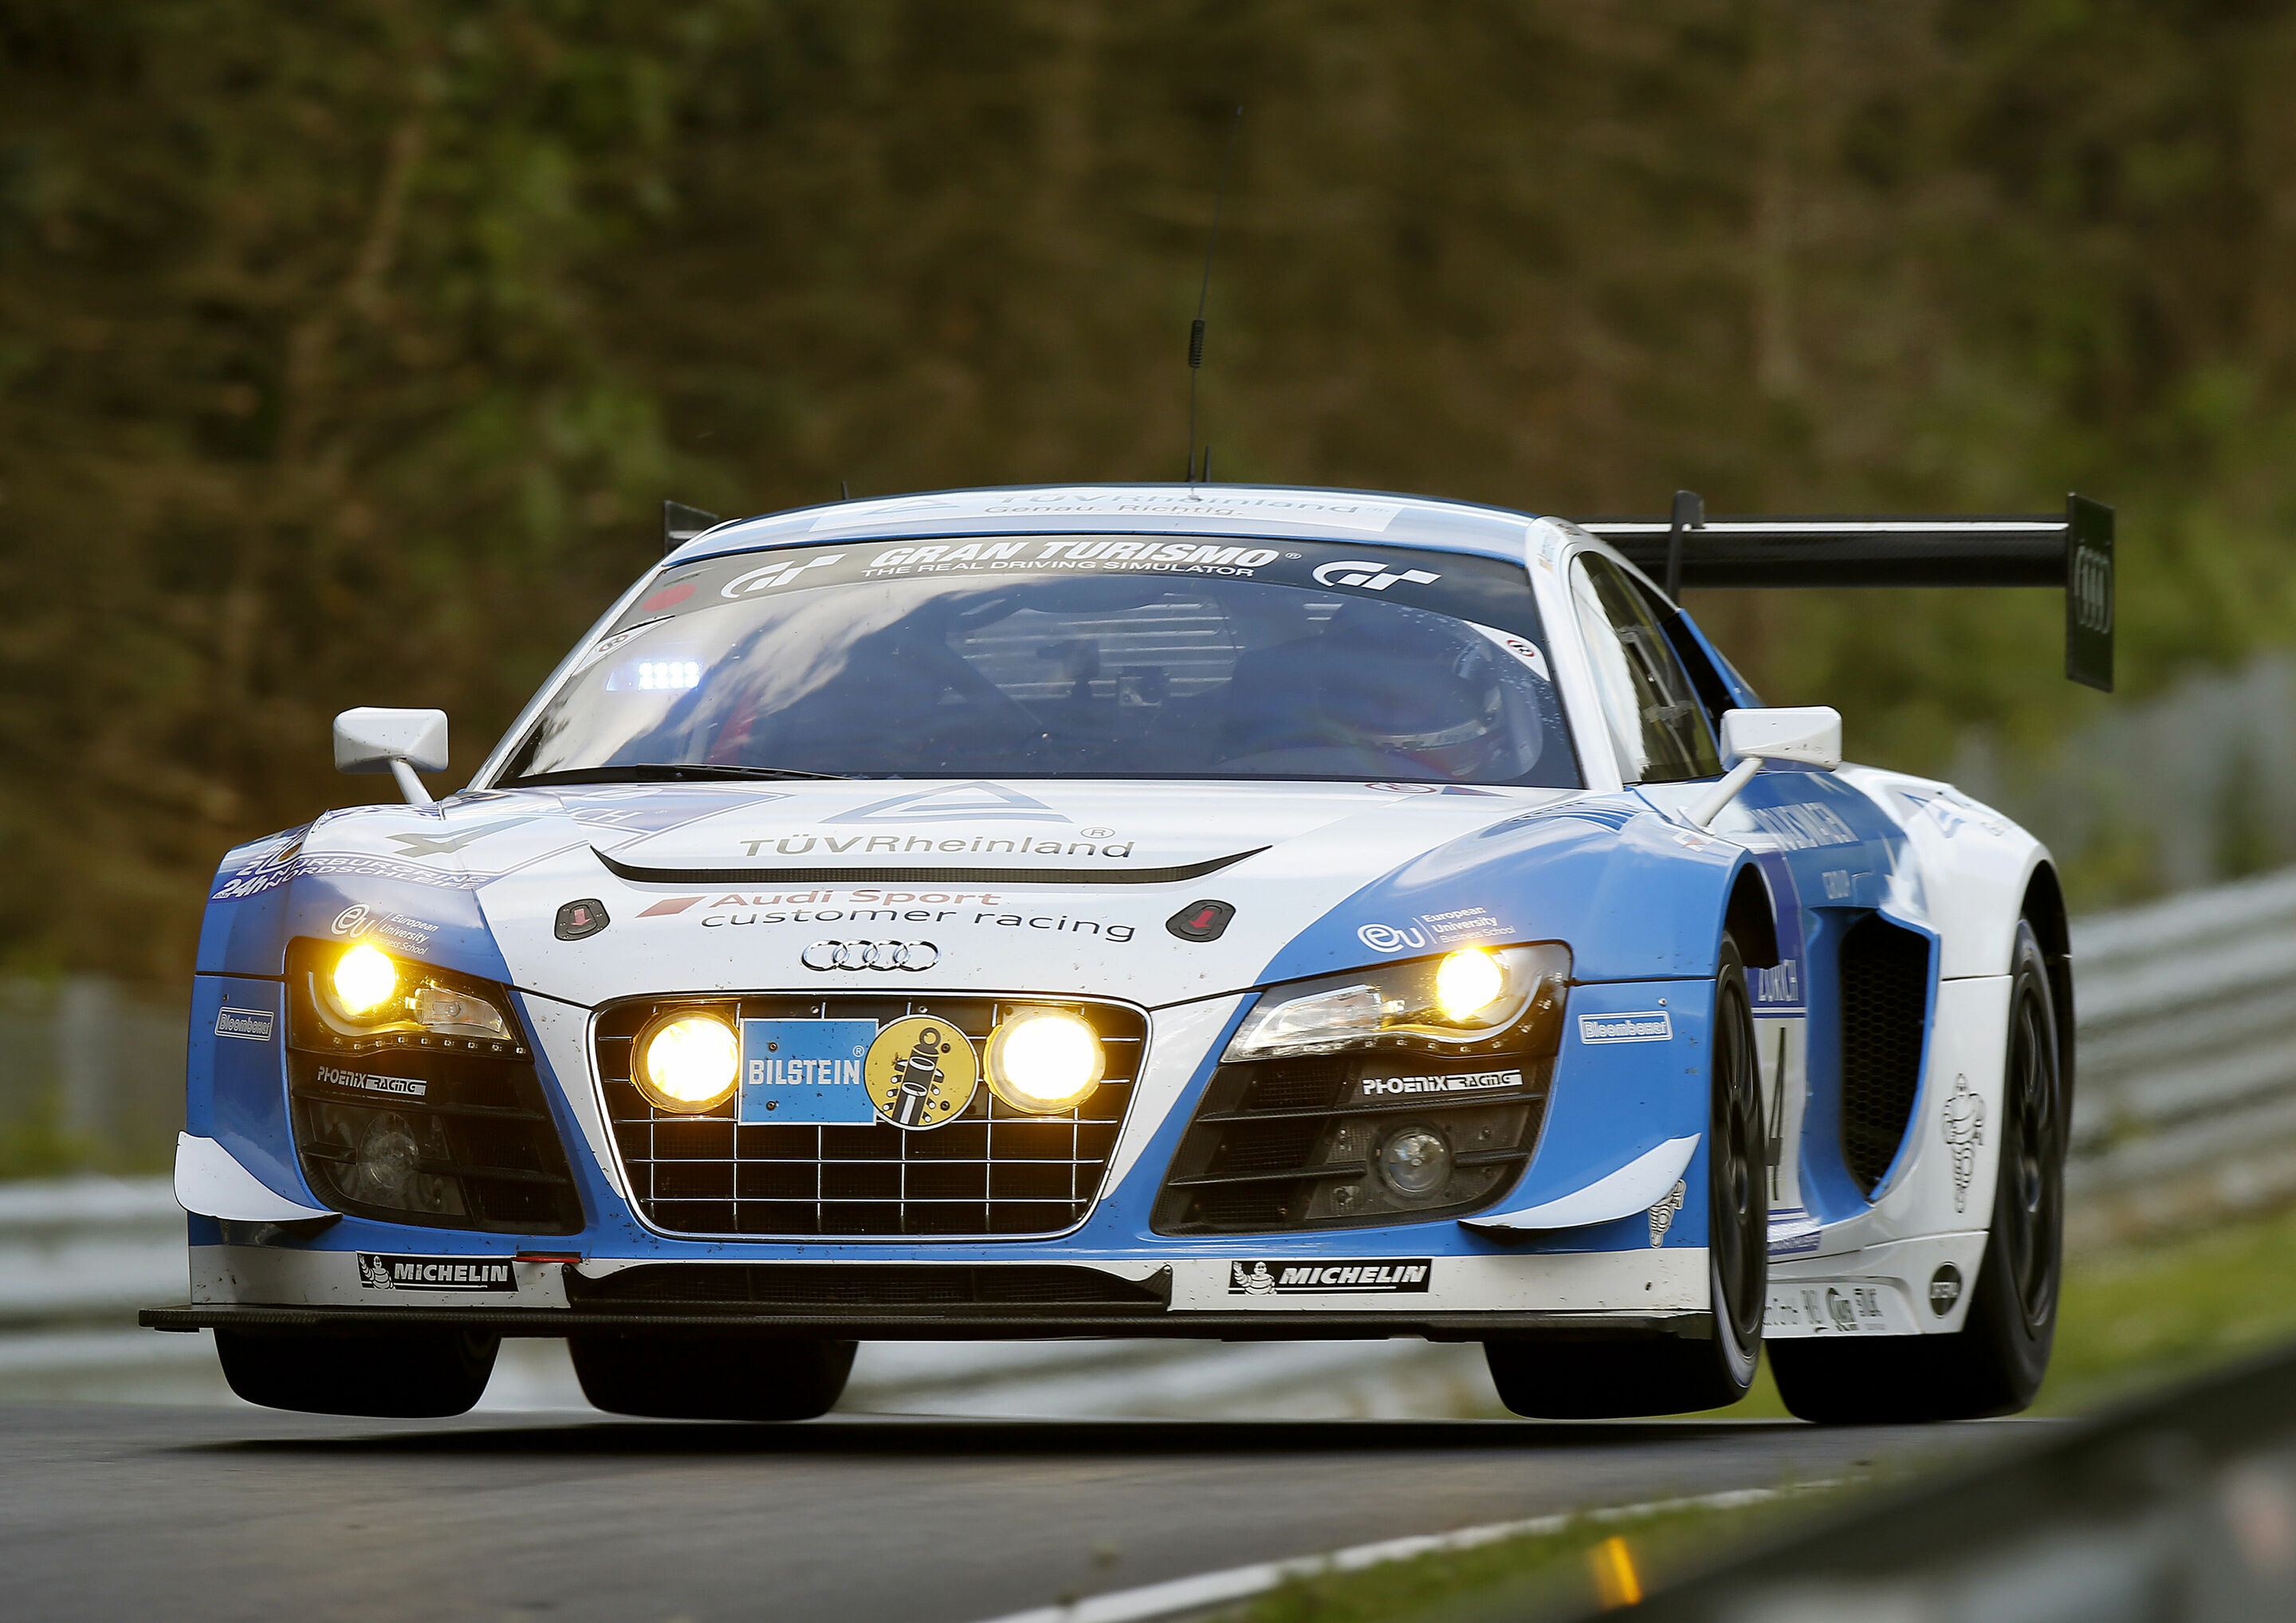 Audi customers at Nürburgring on grid positions one and three